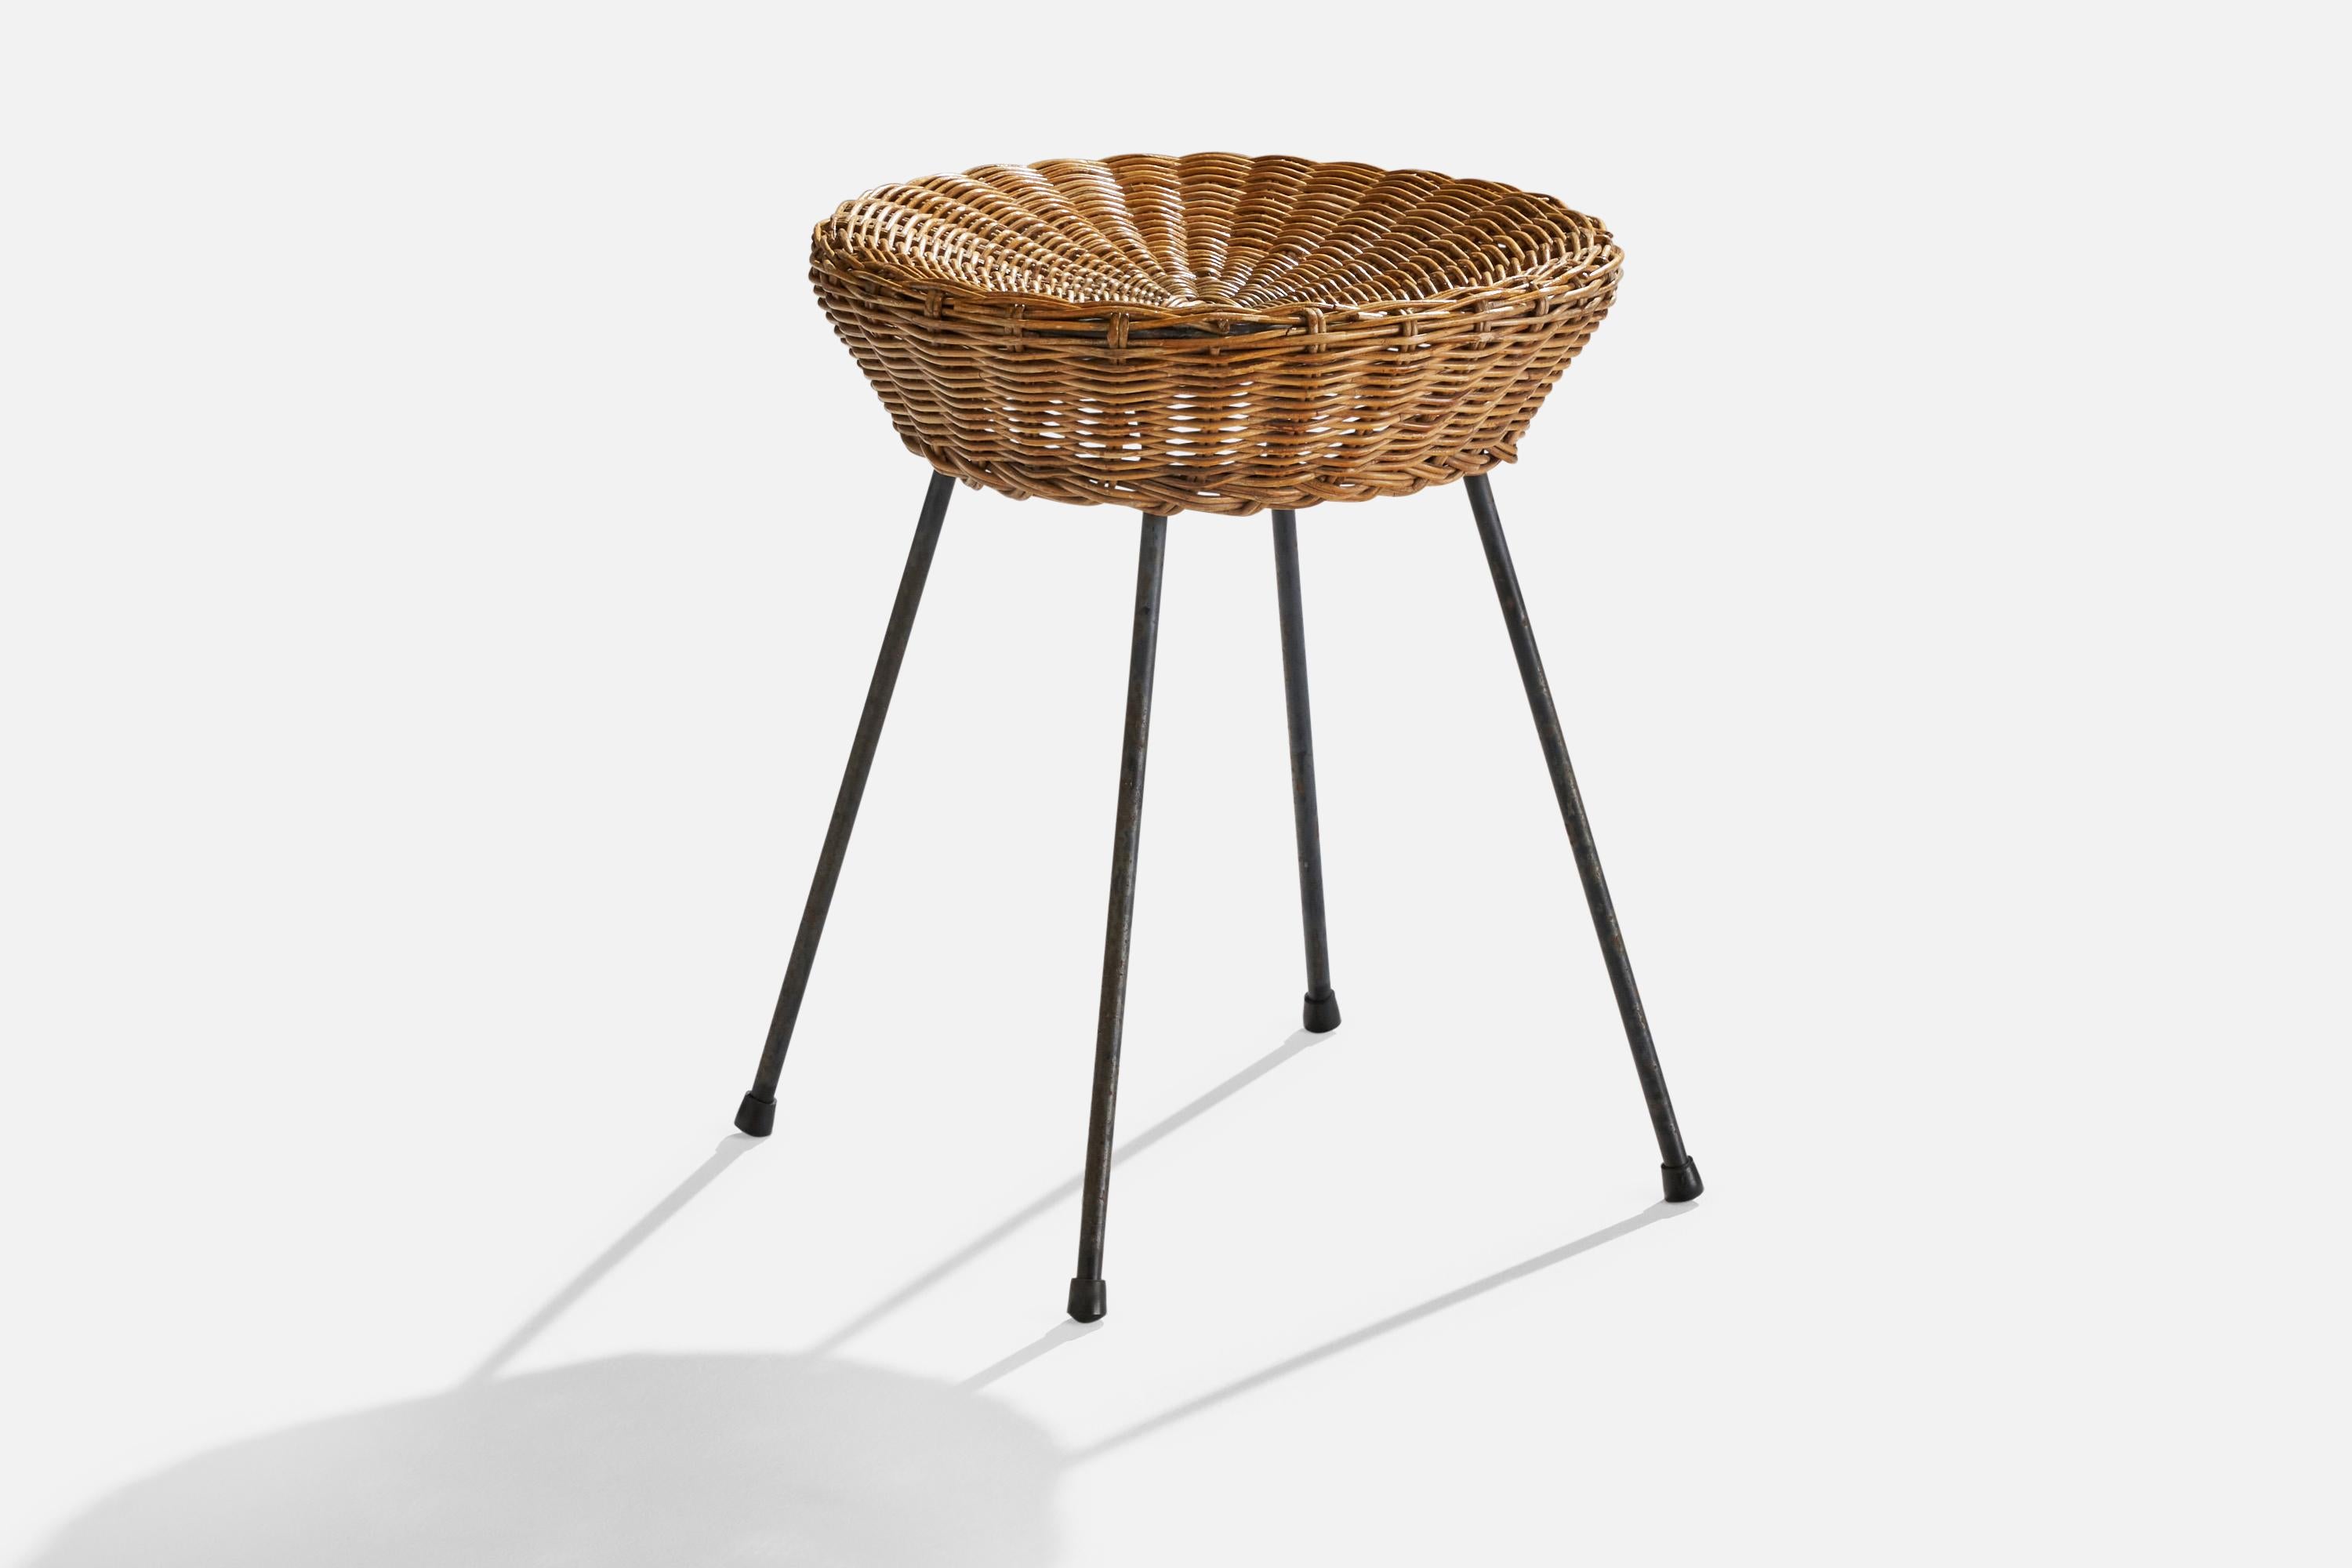 A black-lacquered metal and rattan stool designed and produced in Italy, 1950s.

seat height 18” 